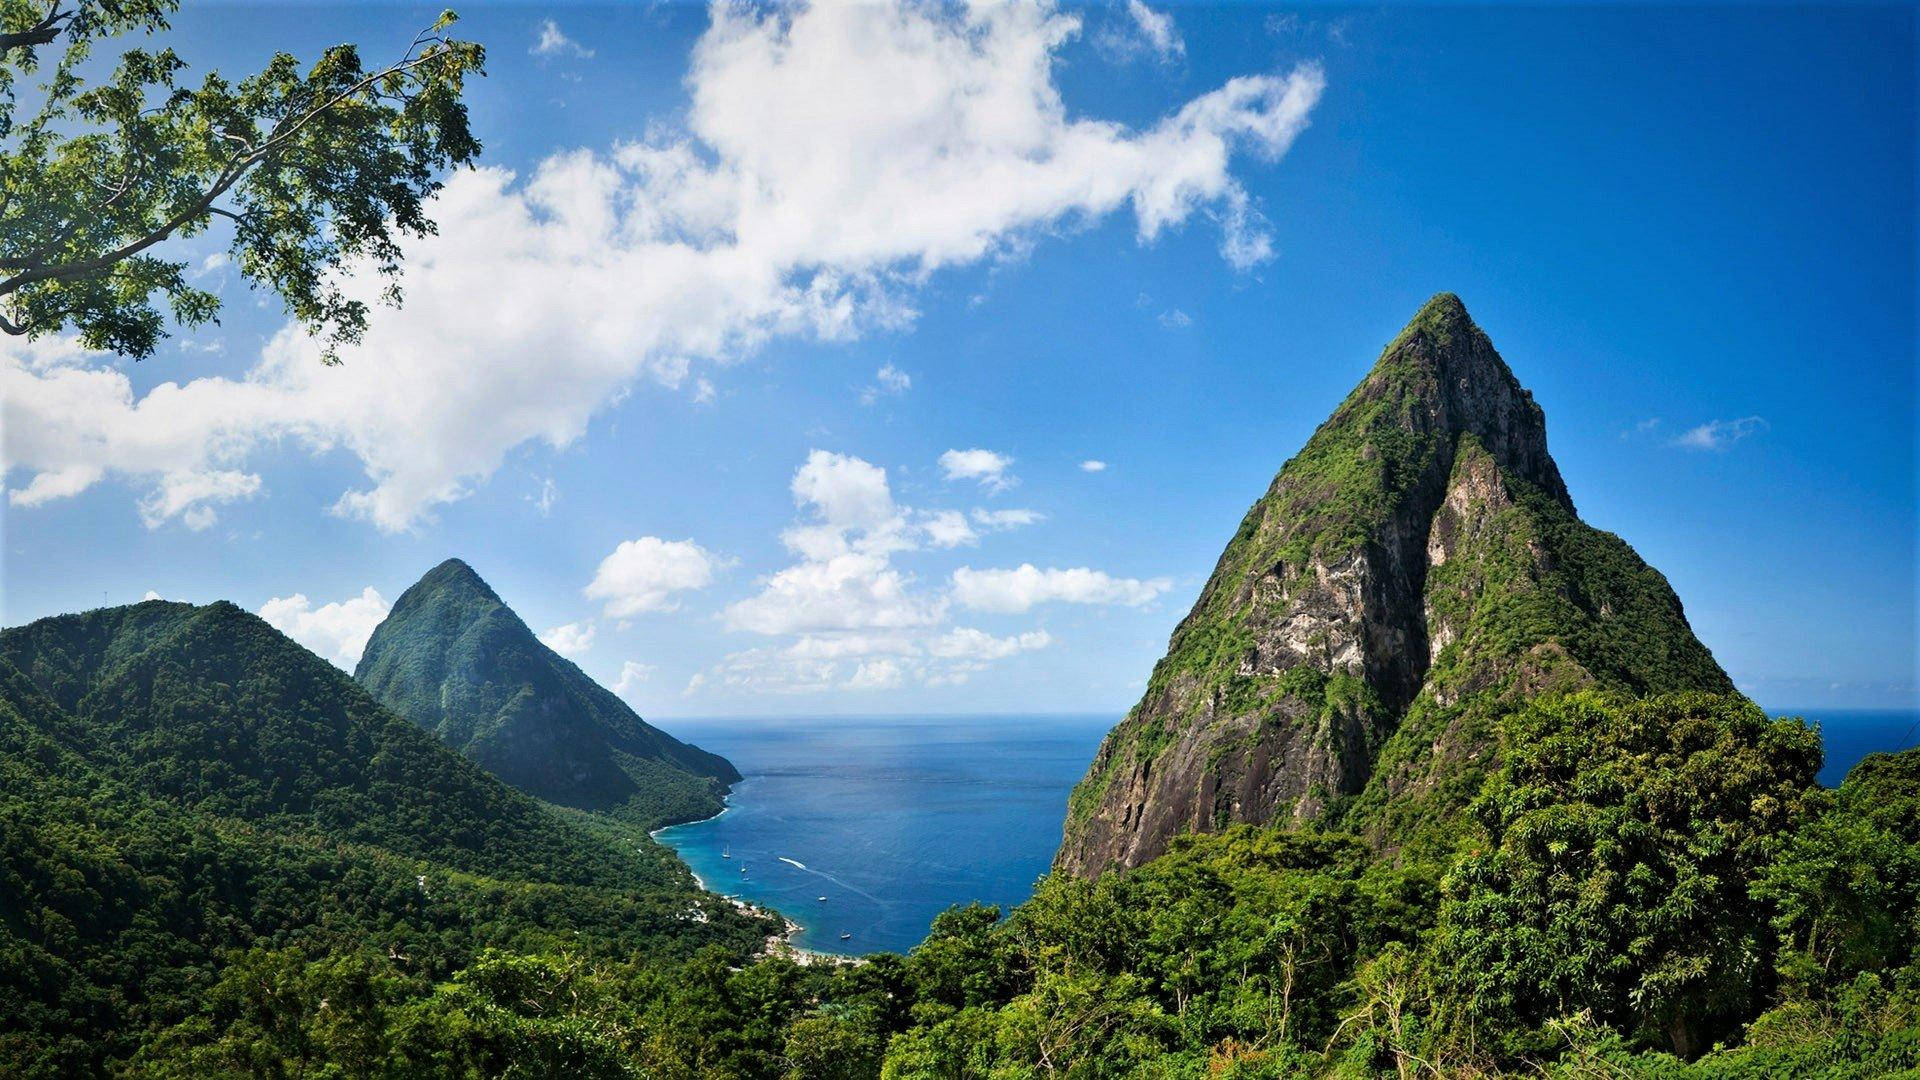 Land, Sea, And Sky Of St Lucia Wallpaper